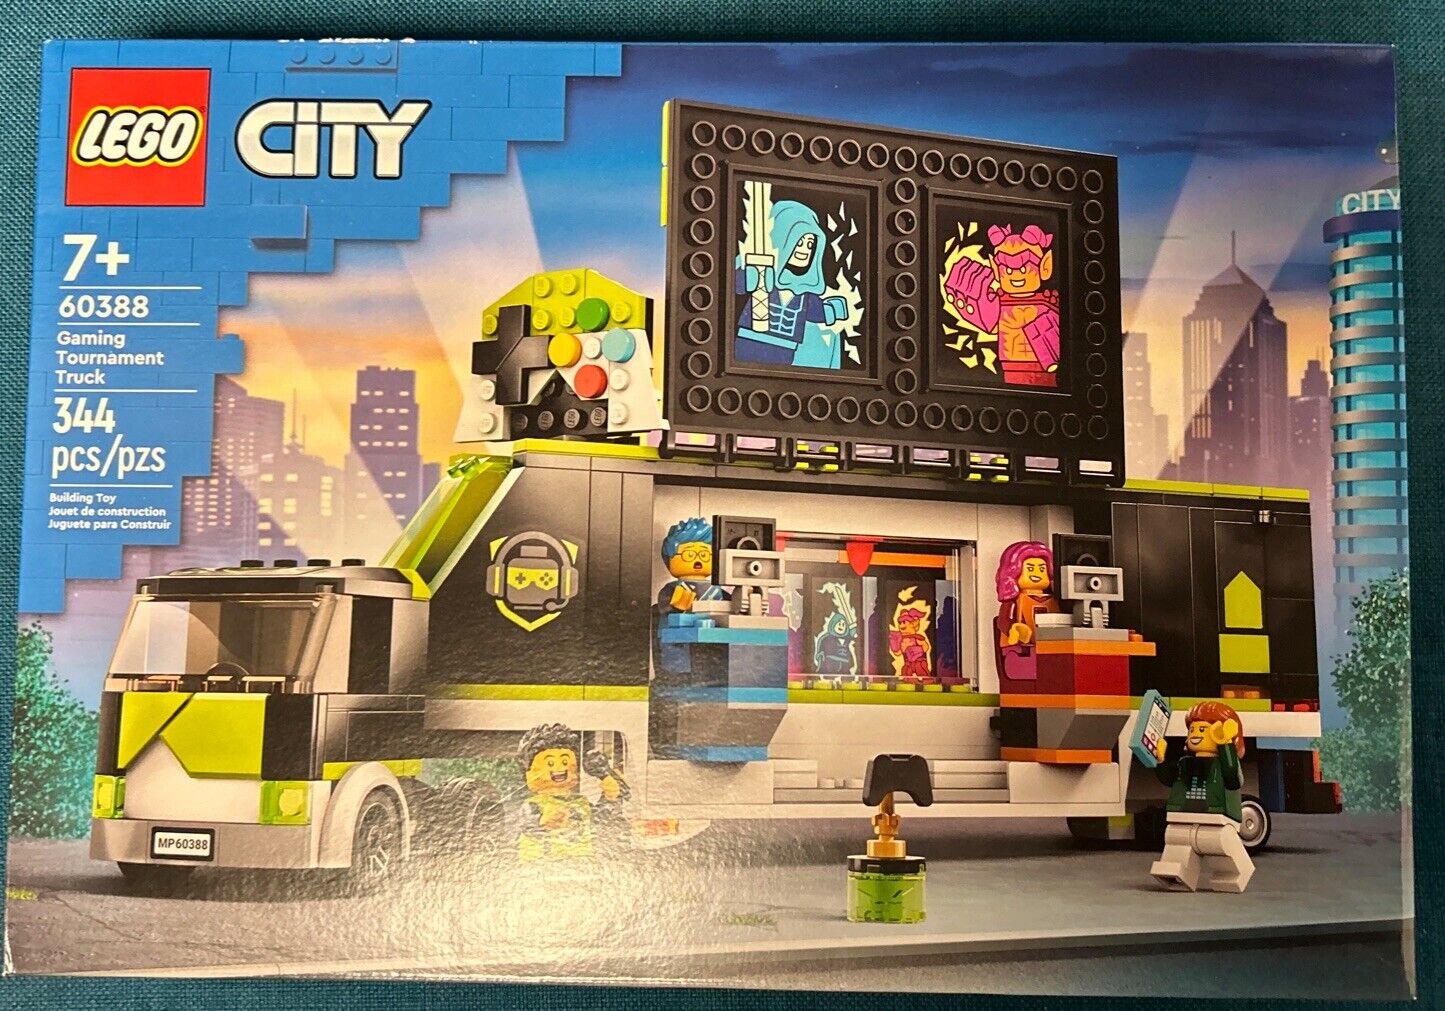 Lego City Gaming Tournament Truck 60388 7+ Sealed New